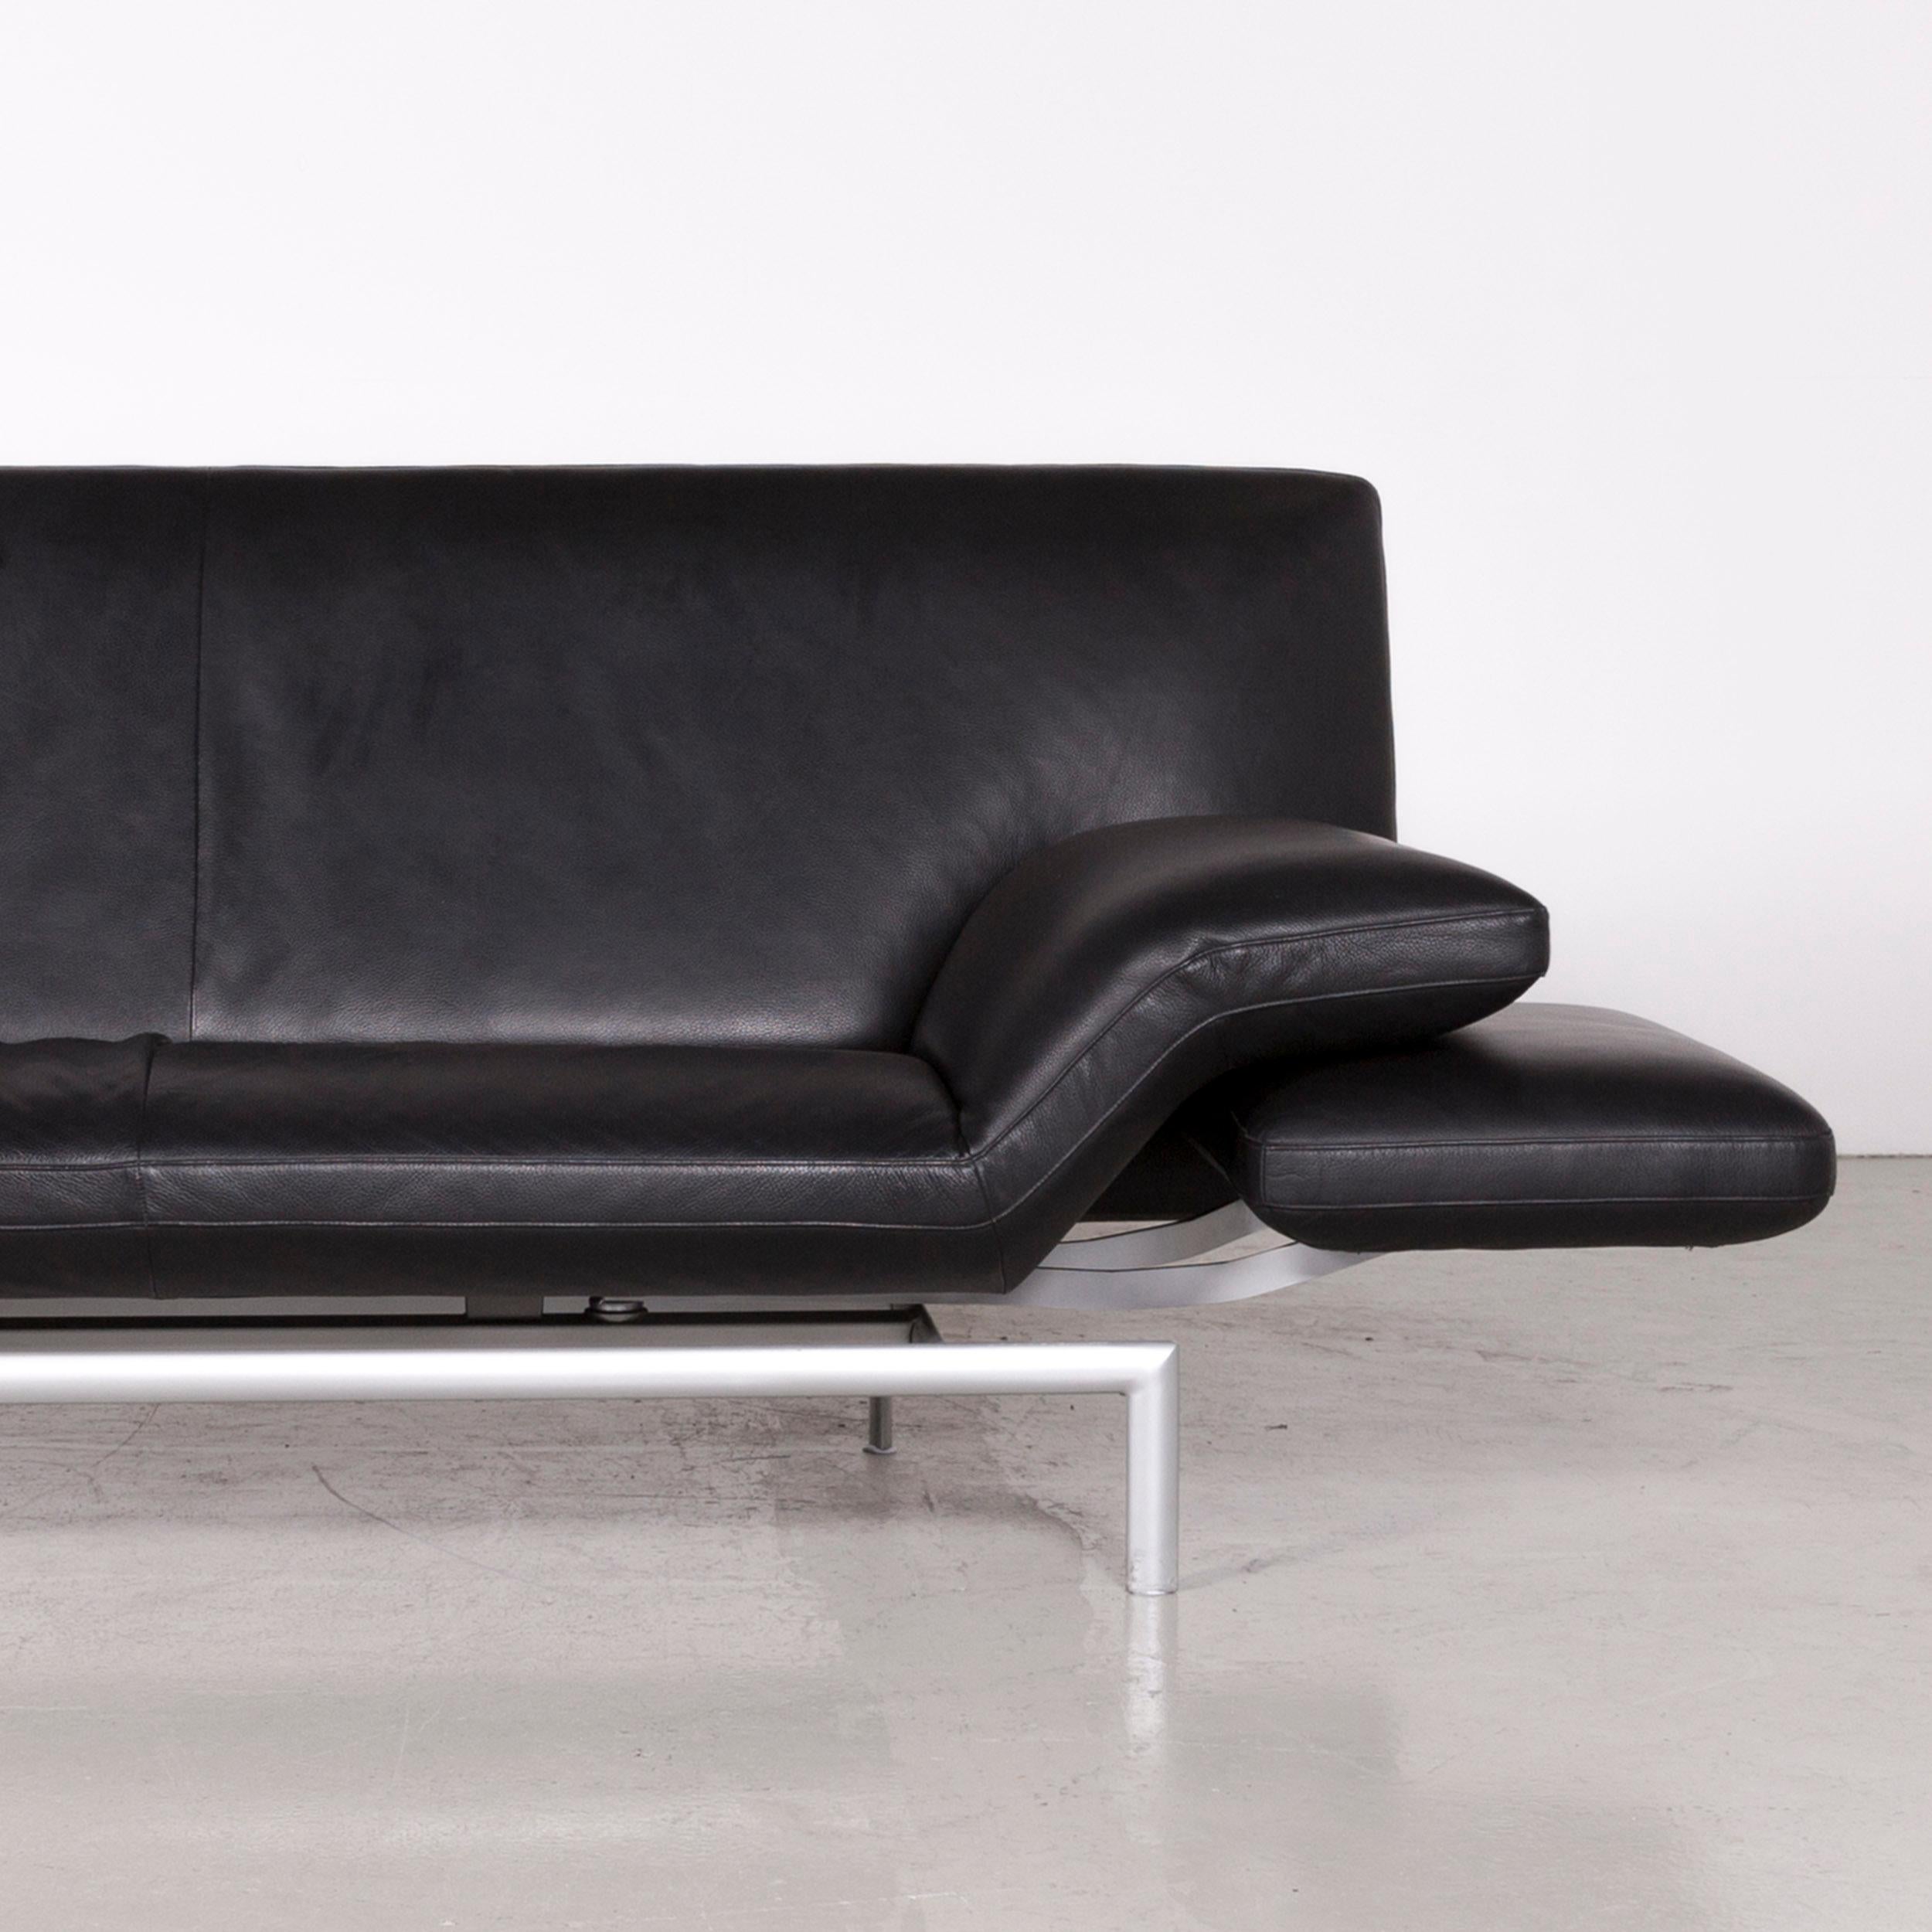 Contemporary Designo Flyer Designer Leather Sofa Black Three-Seat Couch with Function